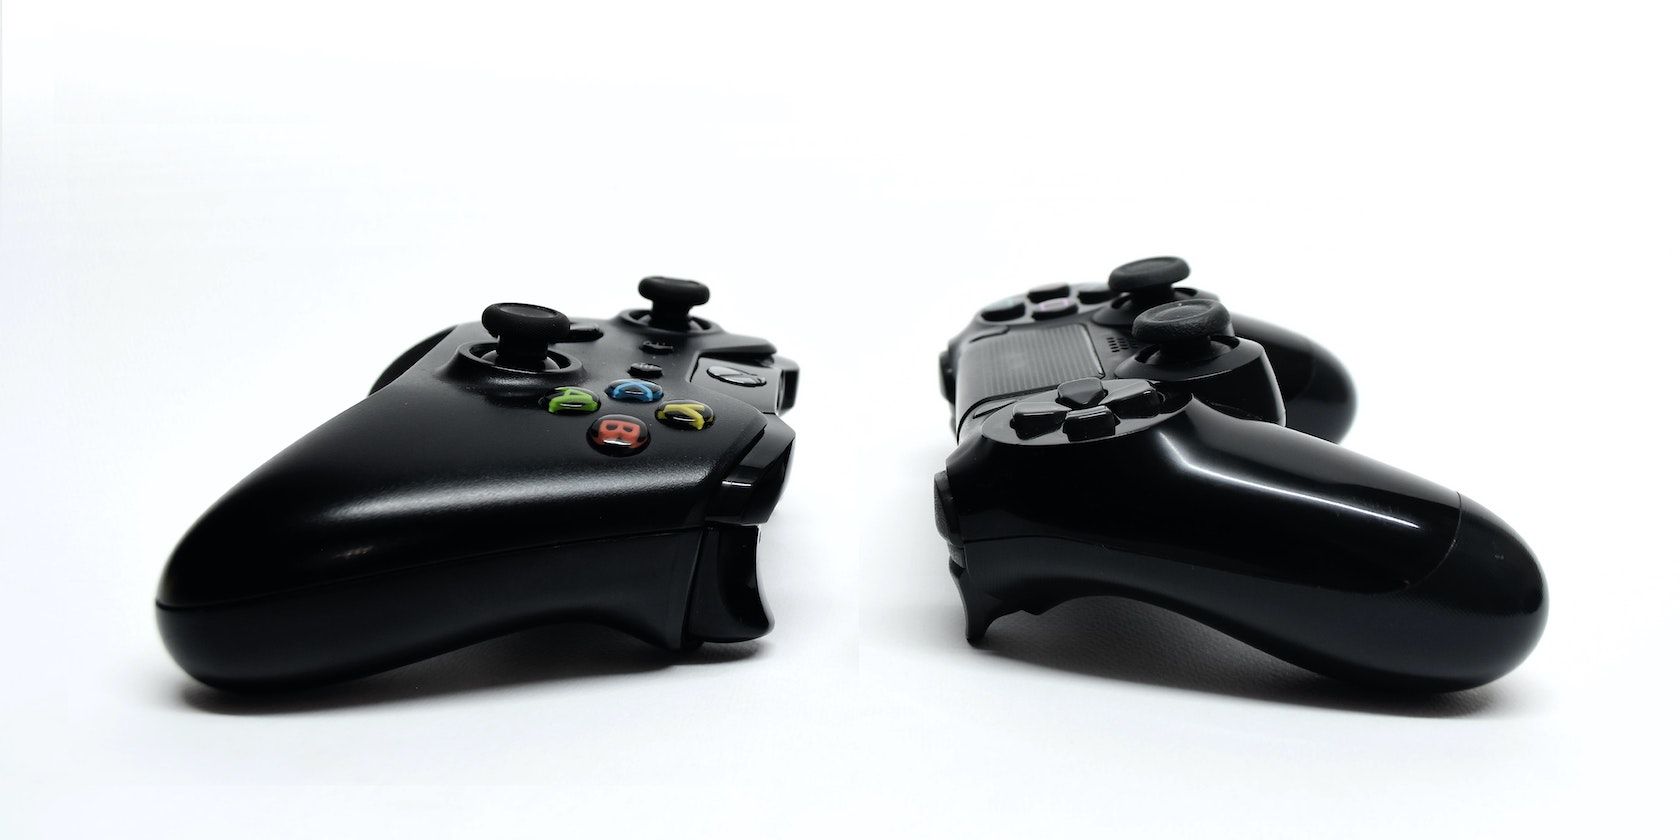 Explained: What is cross-platform gaming and how is it useful for gamers -  Times of India